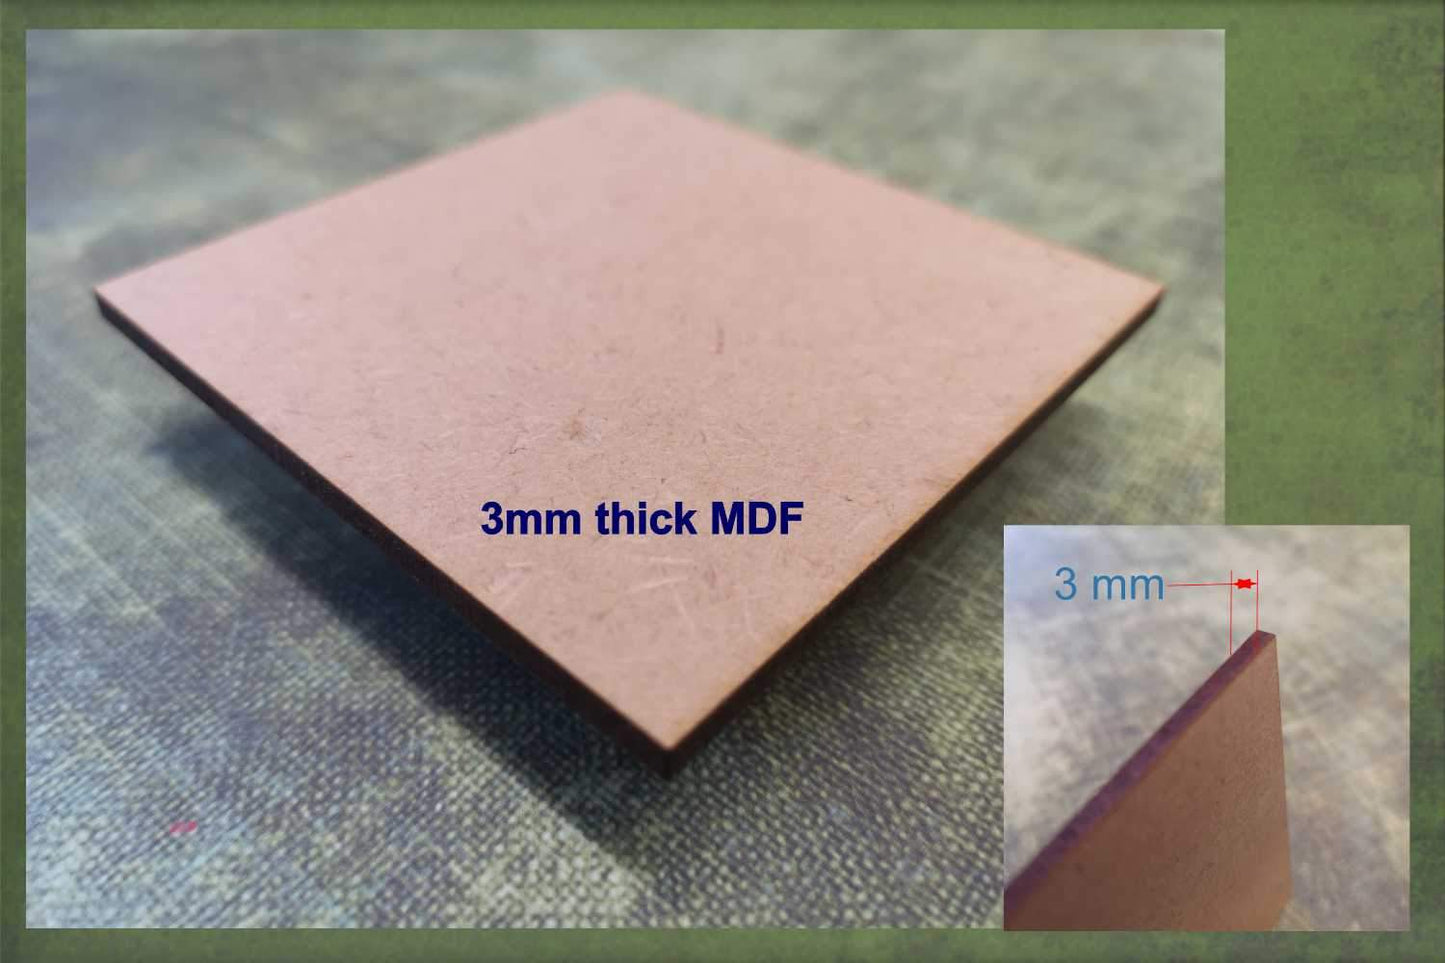 3mm thick MDF used to make the Pointed star cut-outs ready for crafting